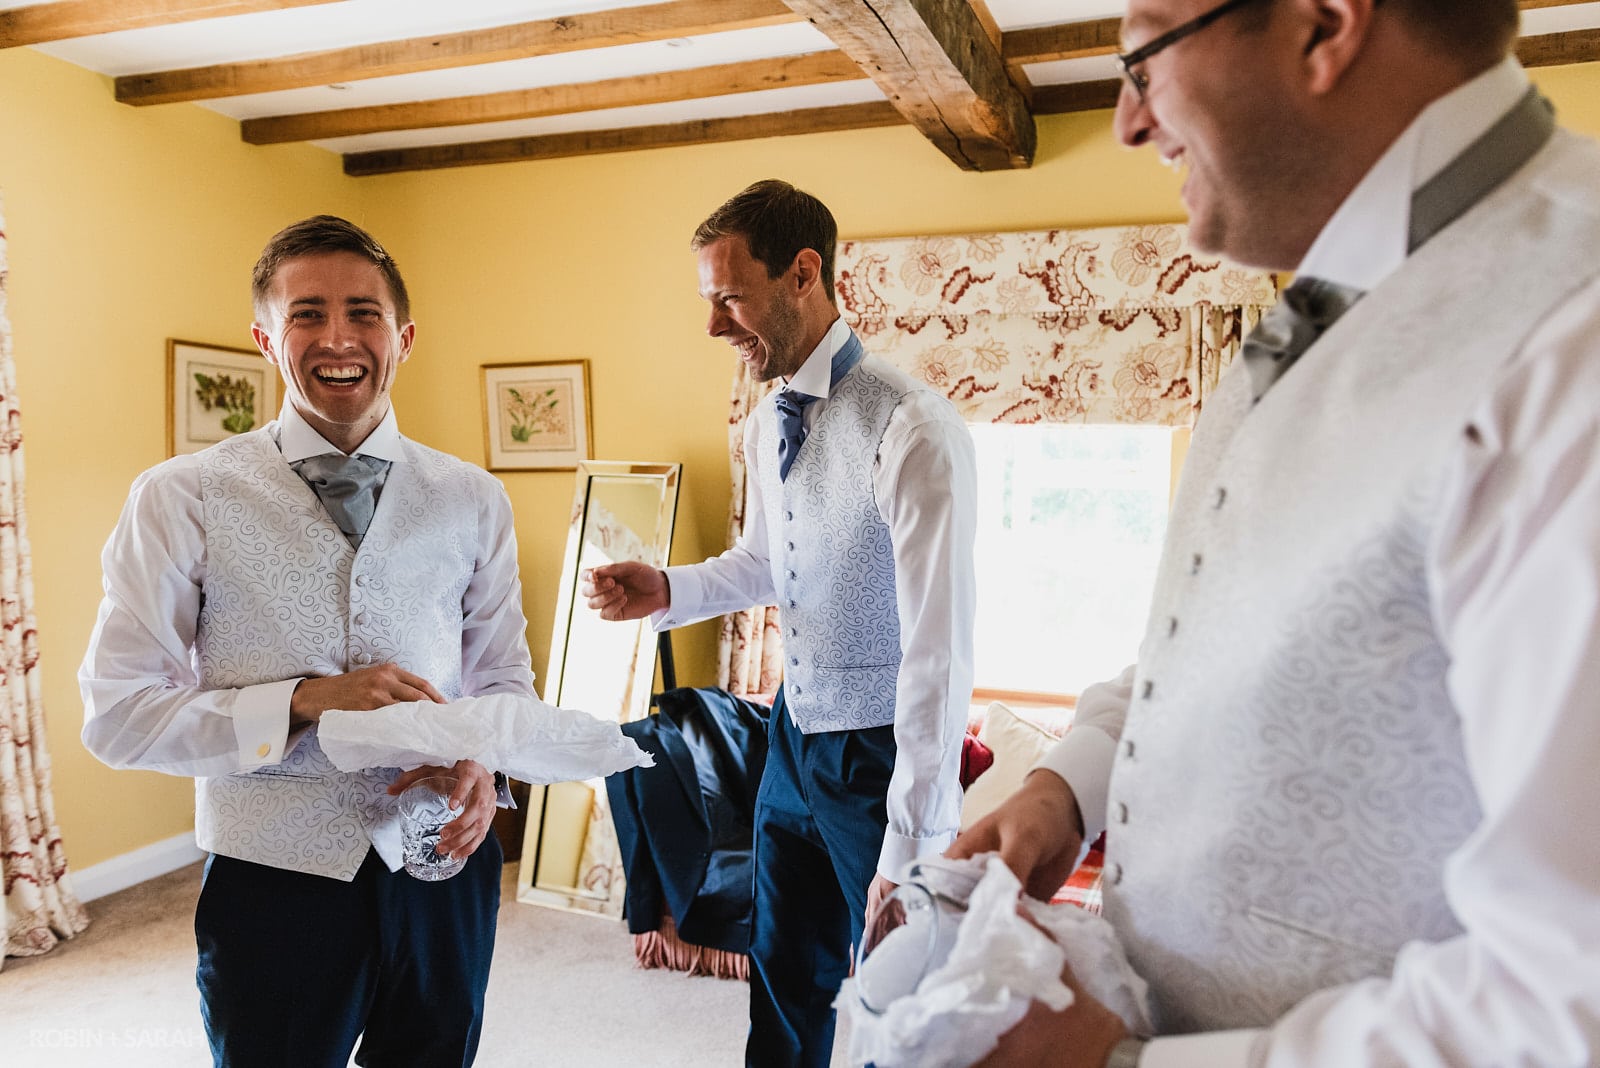 Groom and groomsmen laugh as they prepare for wedding